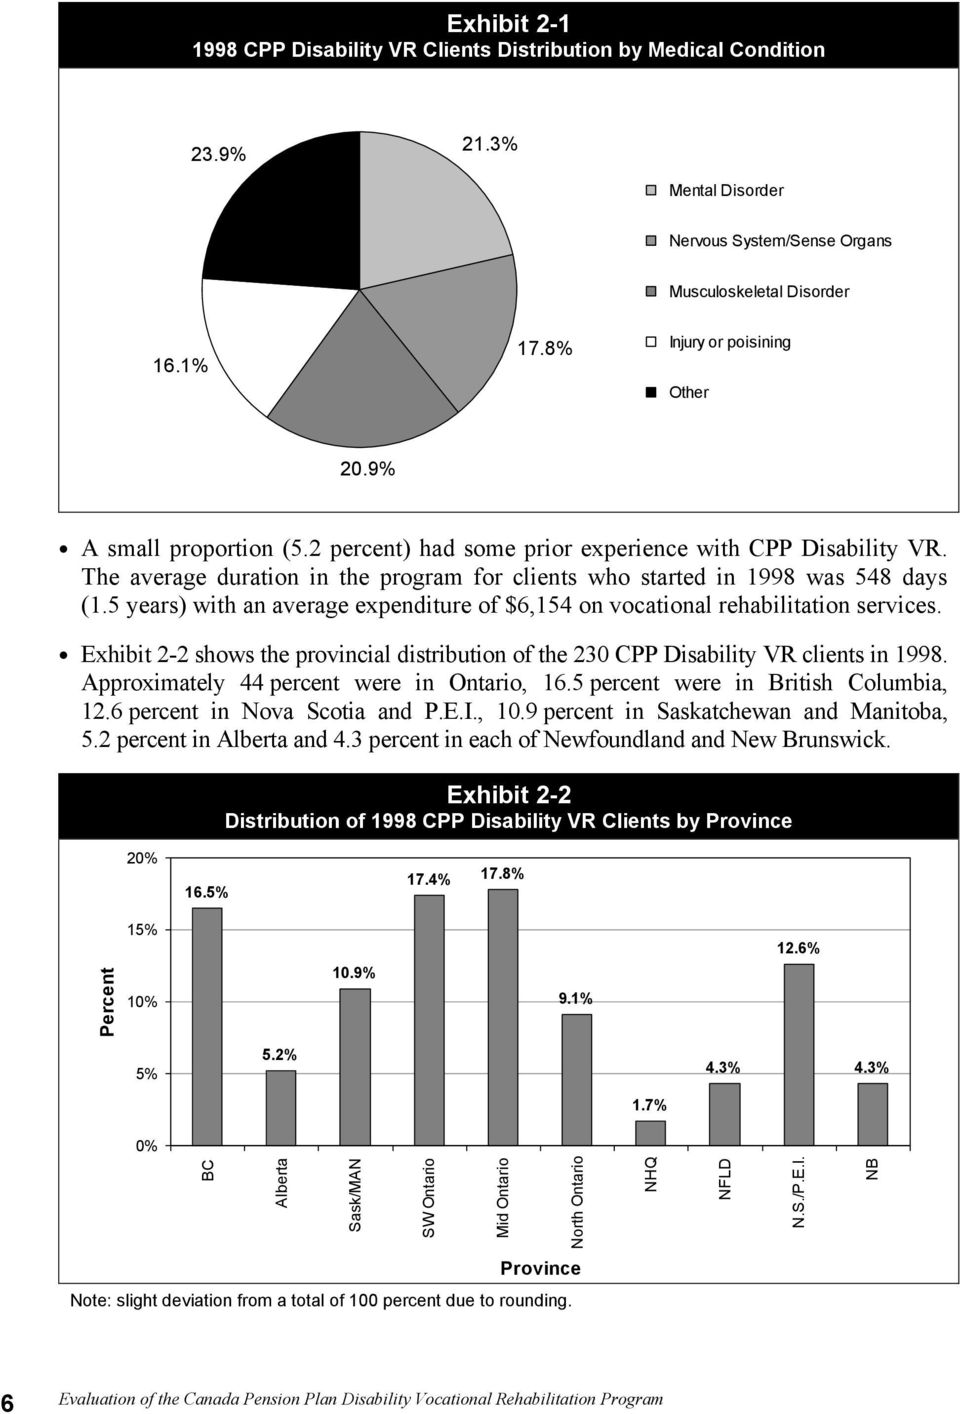 5 years) with an average expenditure of $6,154 on vocational rehabilitation services. Exhibit 2-2 shows the provincial distribution of the 230 CPP Disability VR clients in 1998.